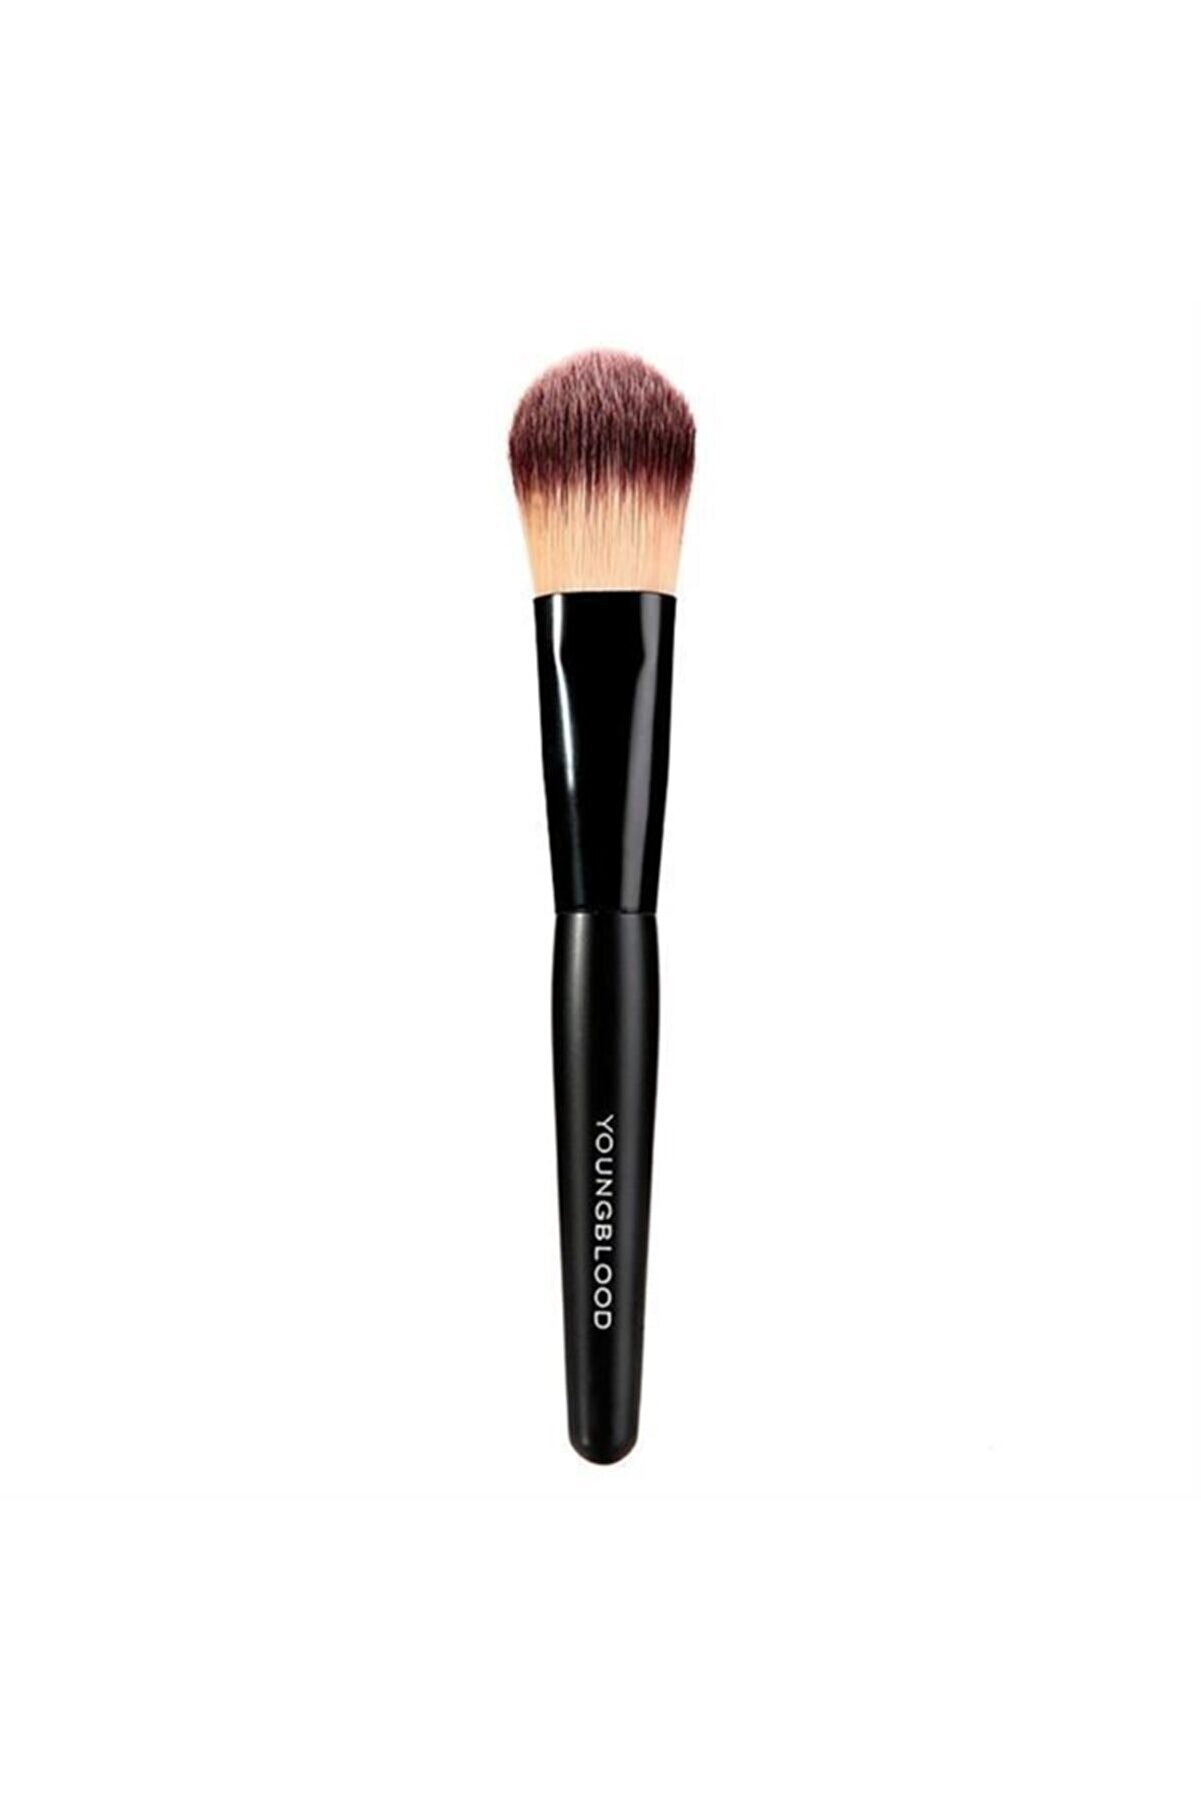 Youngblood Youngblood Brushes Liquid Foundation